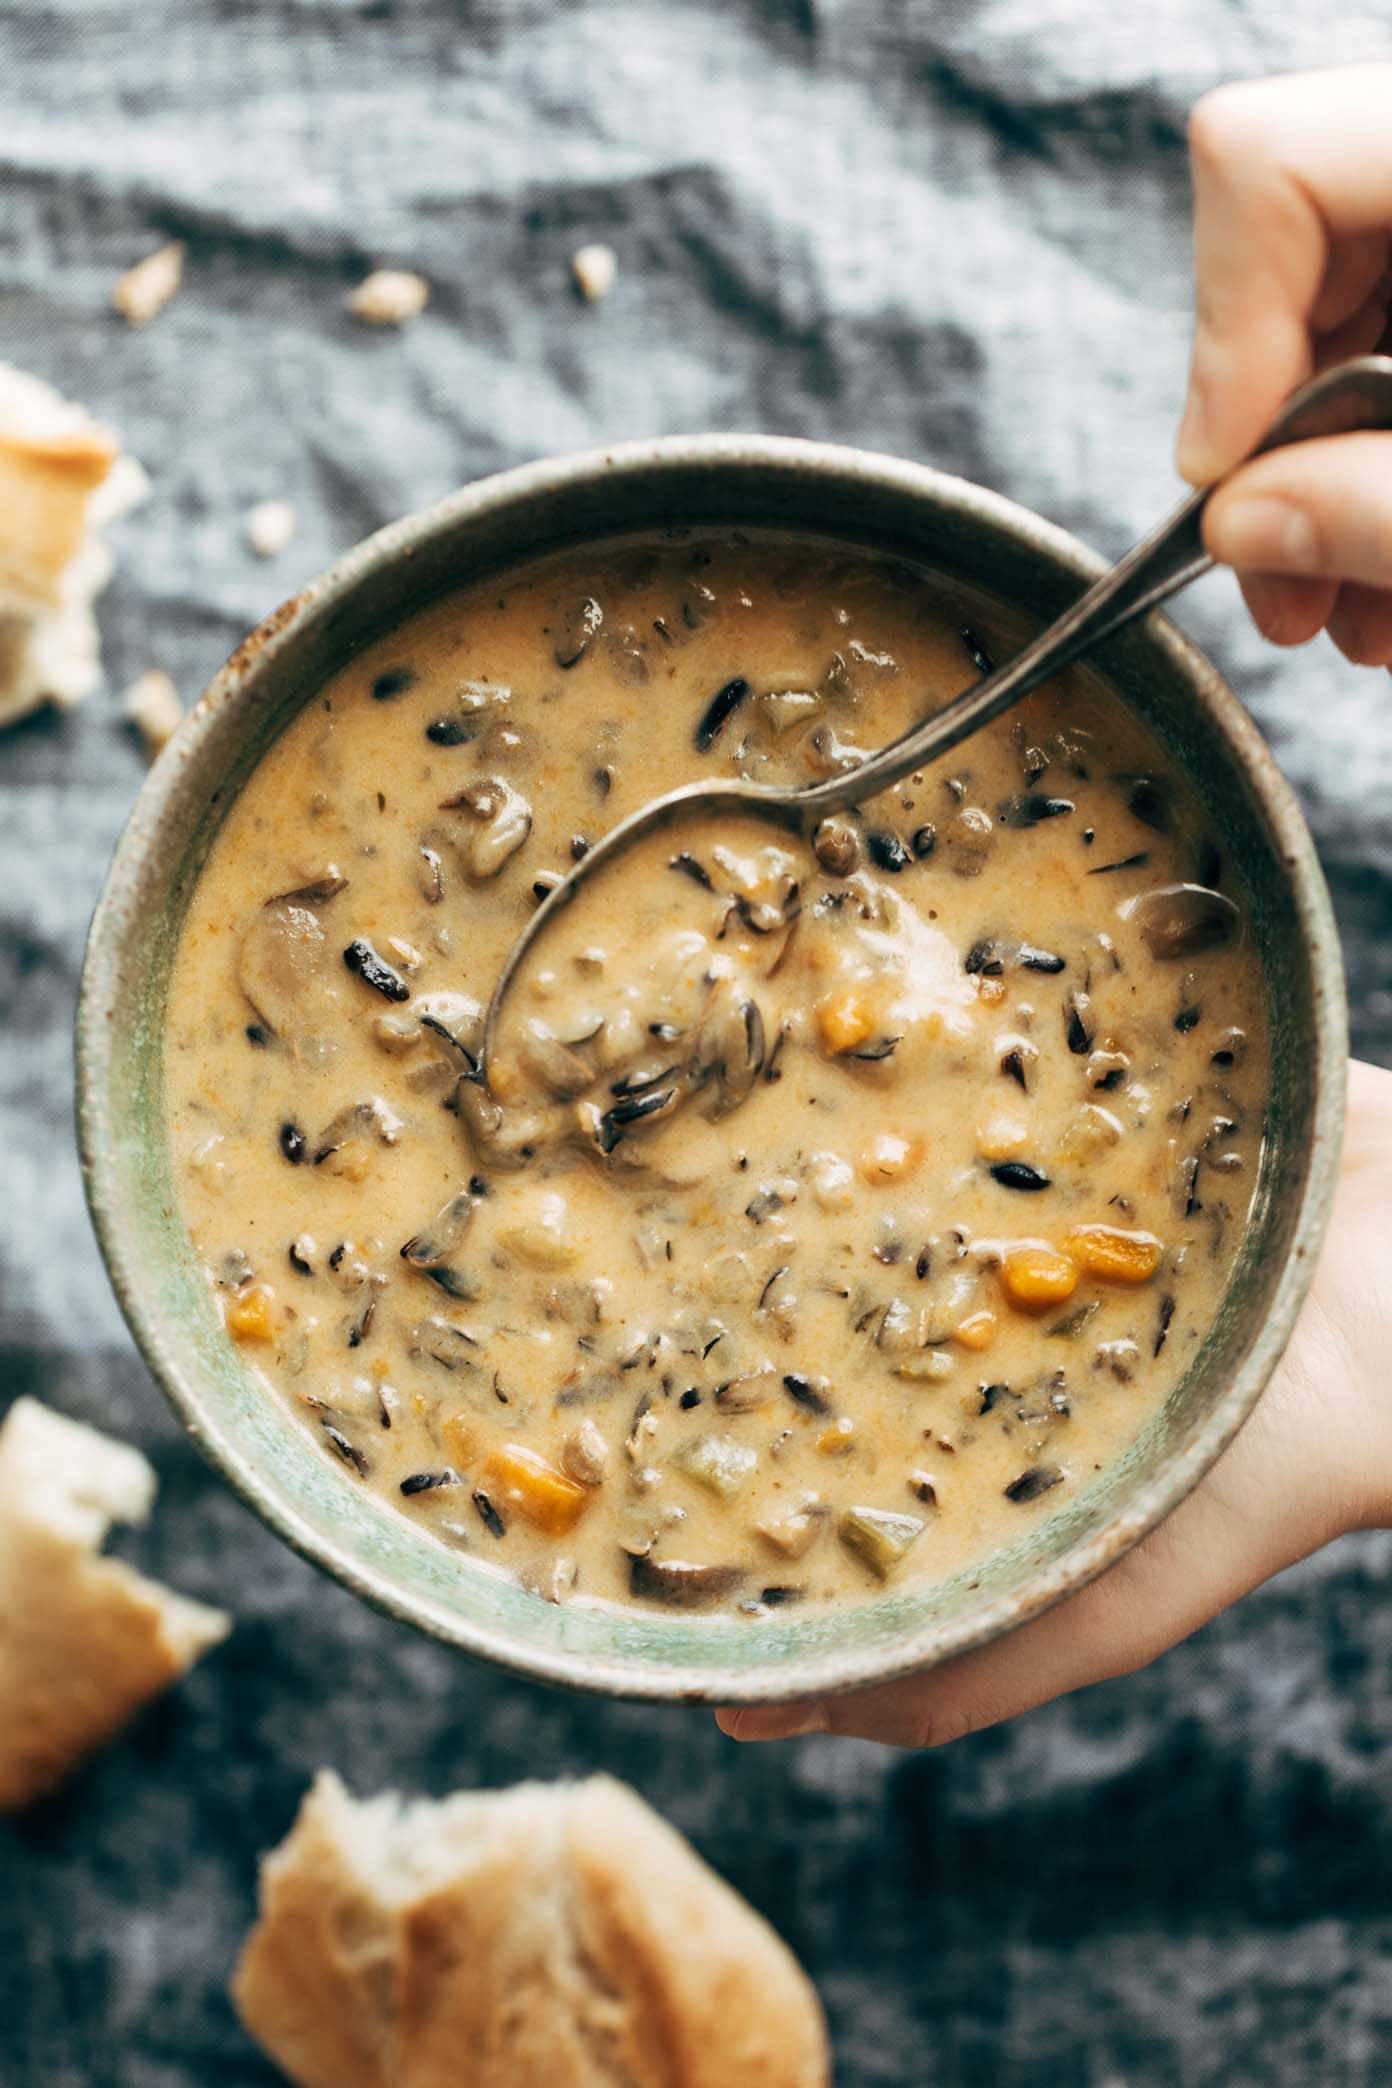 Wild Rice Soup in a bowl with a spoon and pieces of bread.